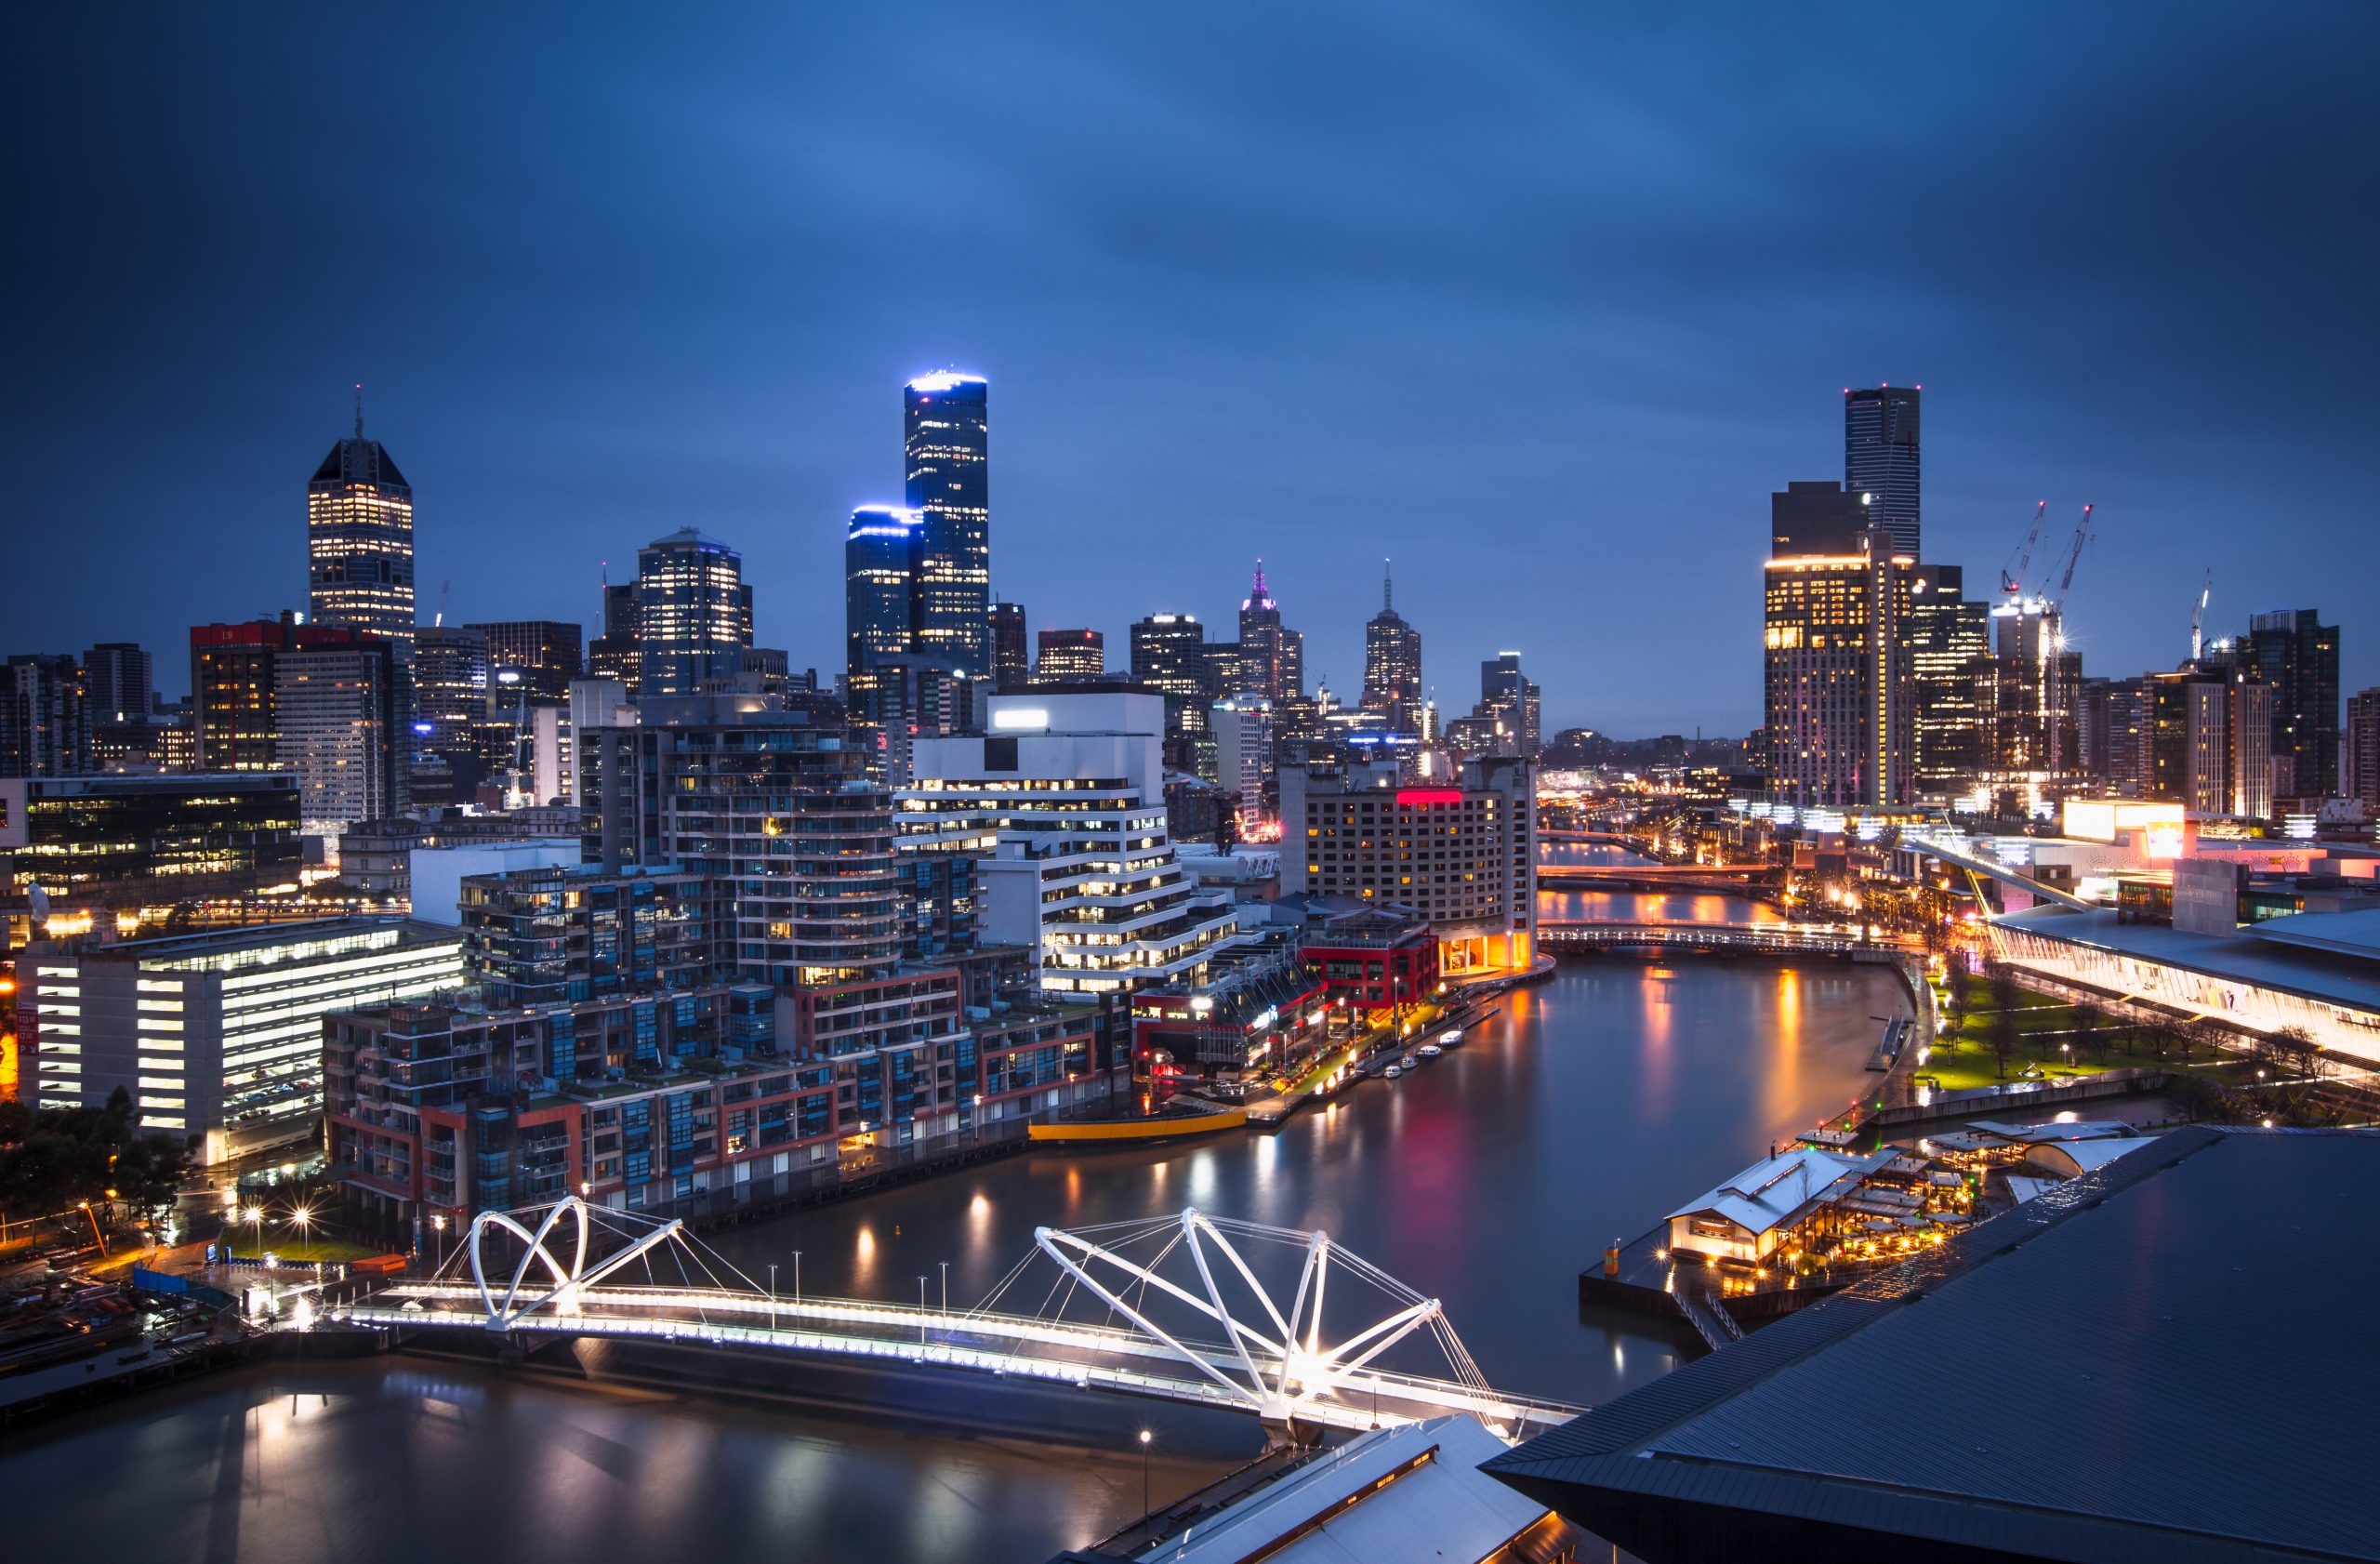 The Yarra River and the city of Melbourne